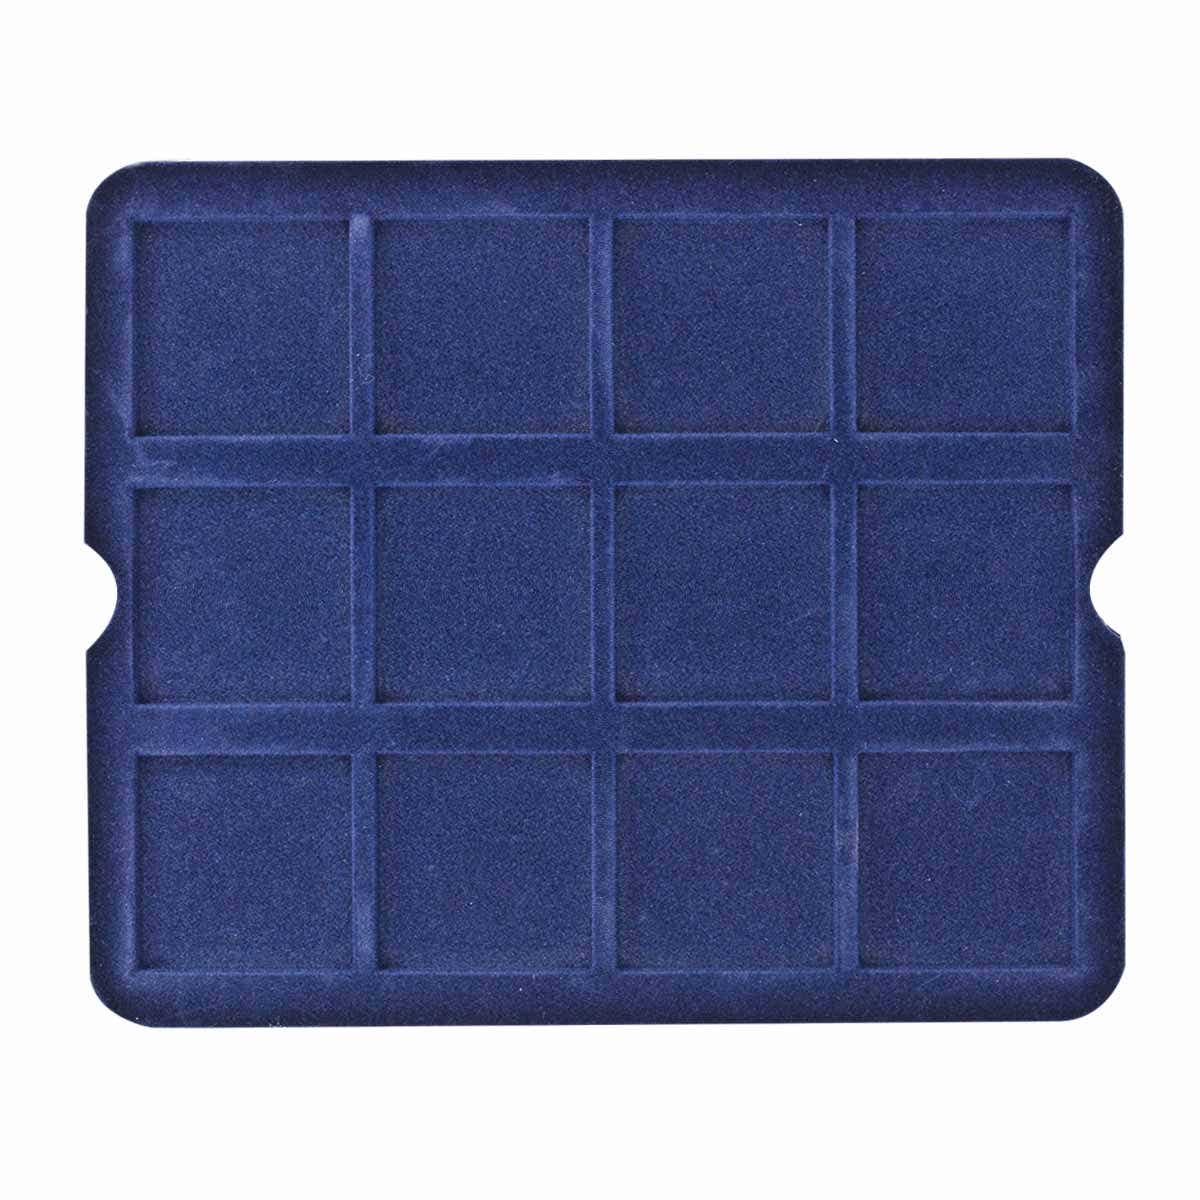 SQUARE TRAY BLUE 50mm (12)